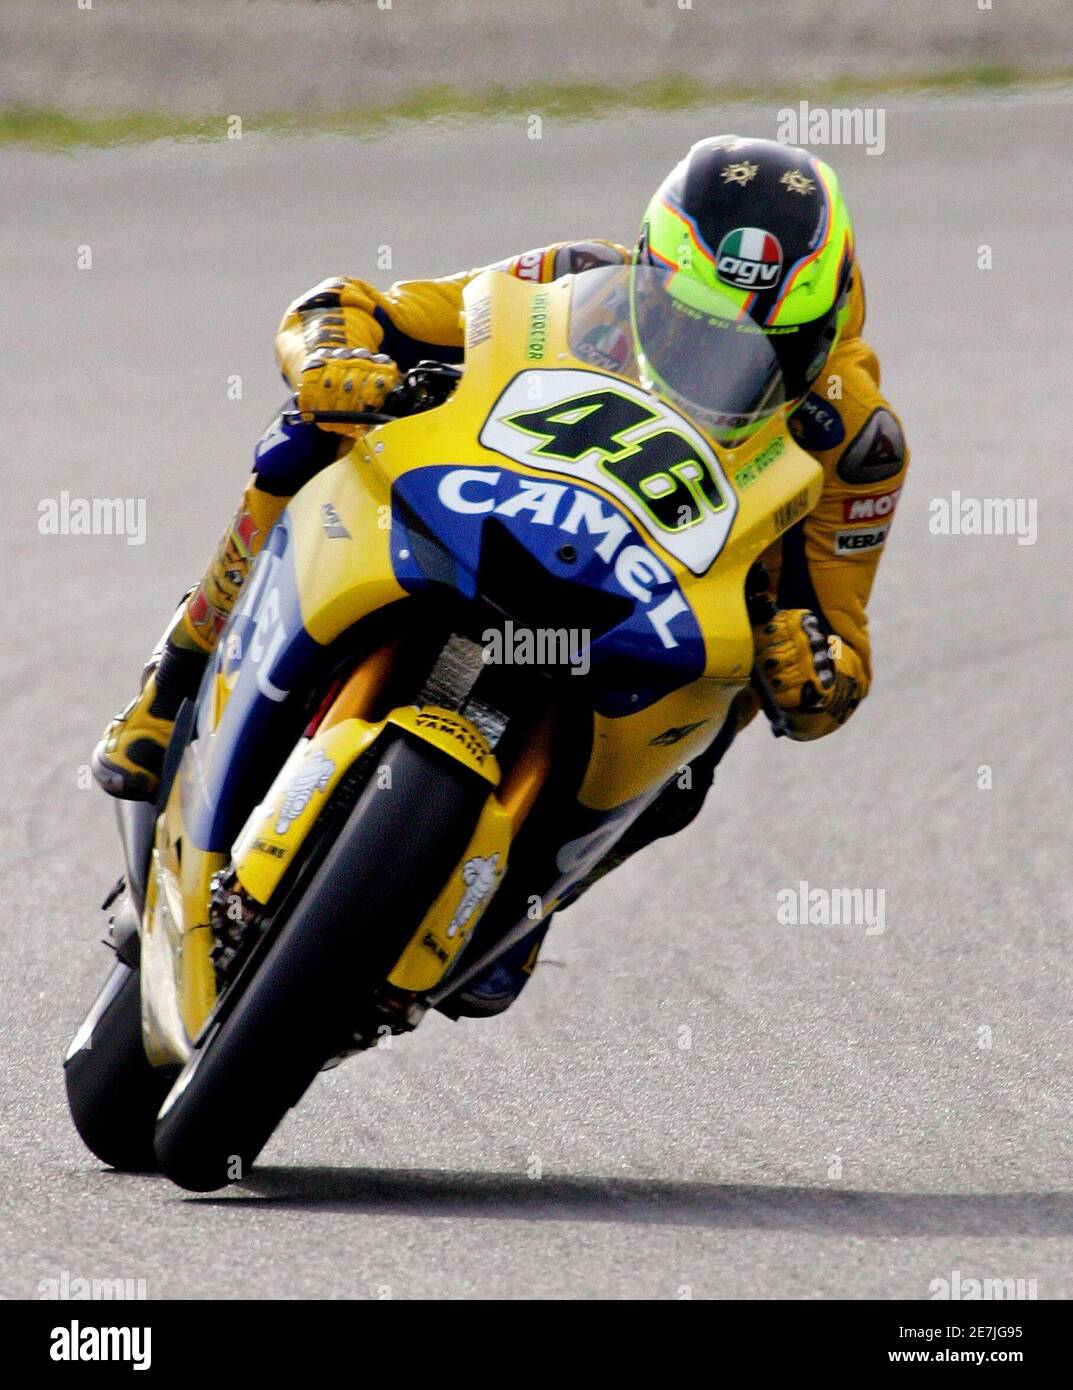 MotoGP world champion Valentino Rossi of Italy rides his Yamaha M1 bike on  the second day of official test in the Catalunya circuit at the Montmelo  racetrack near Barcelona March 4, 2006.